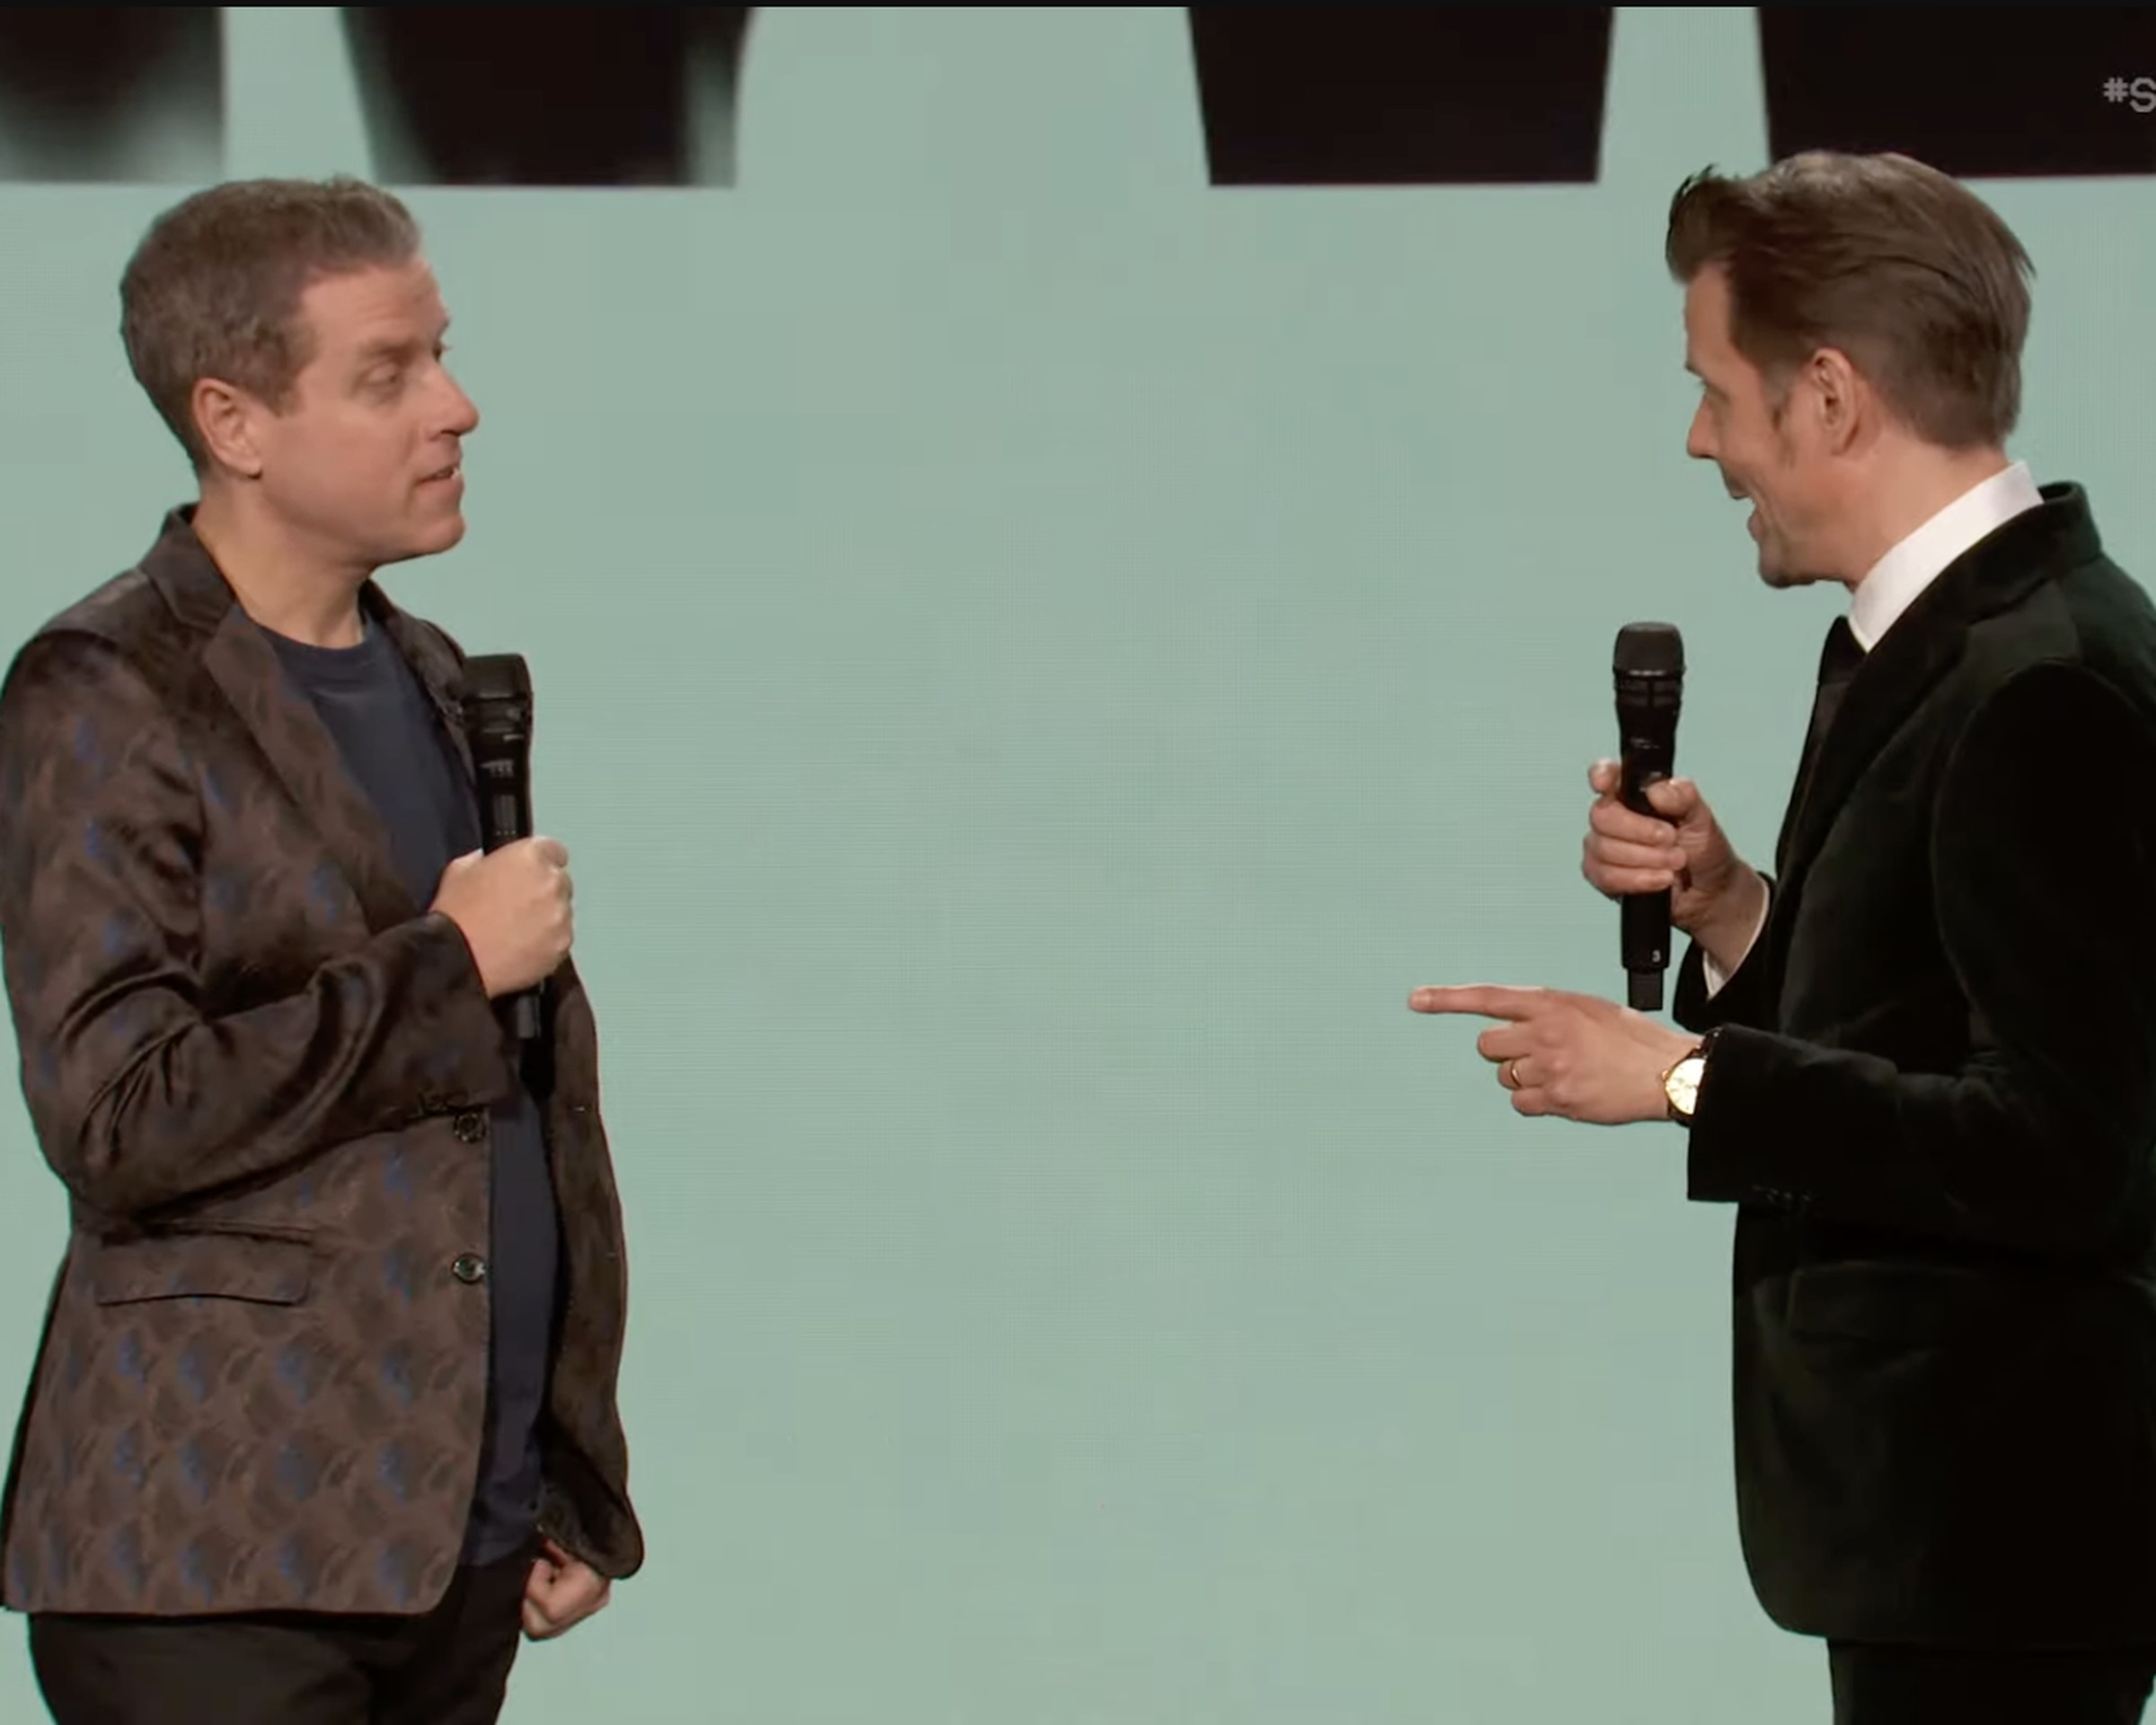 Screenshot from Summer Game Fest featuring Geoff Keighley and Sam Lake from Remedy Entertainment